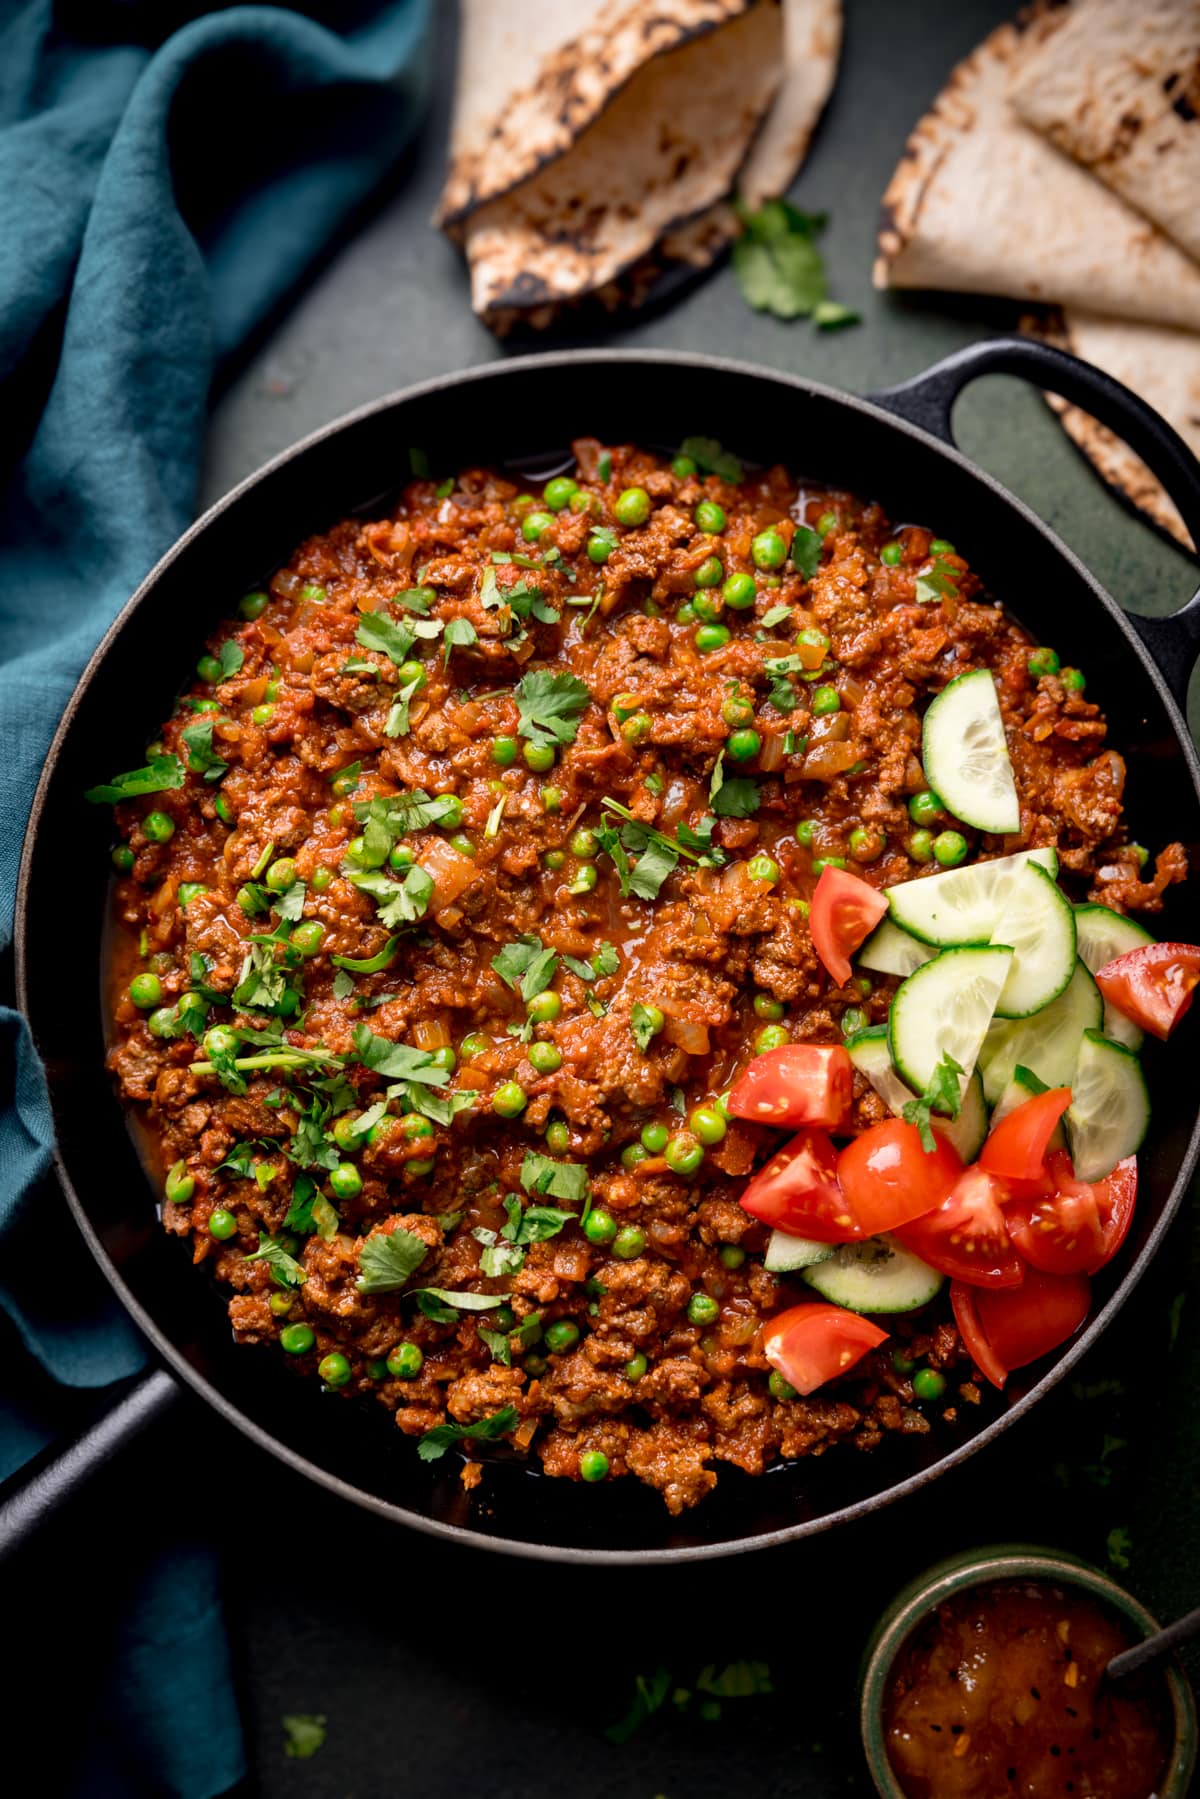 Overhead picture of a cast iron pan full of keema curry (minced beef curry) with some chapati and a dish full of mango chutney in the background.